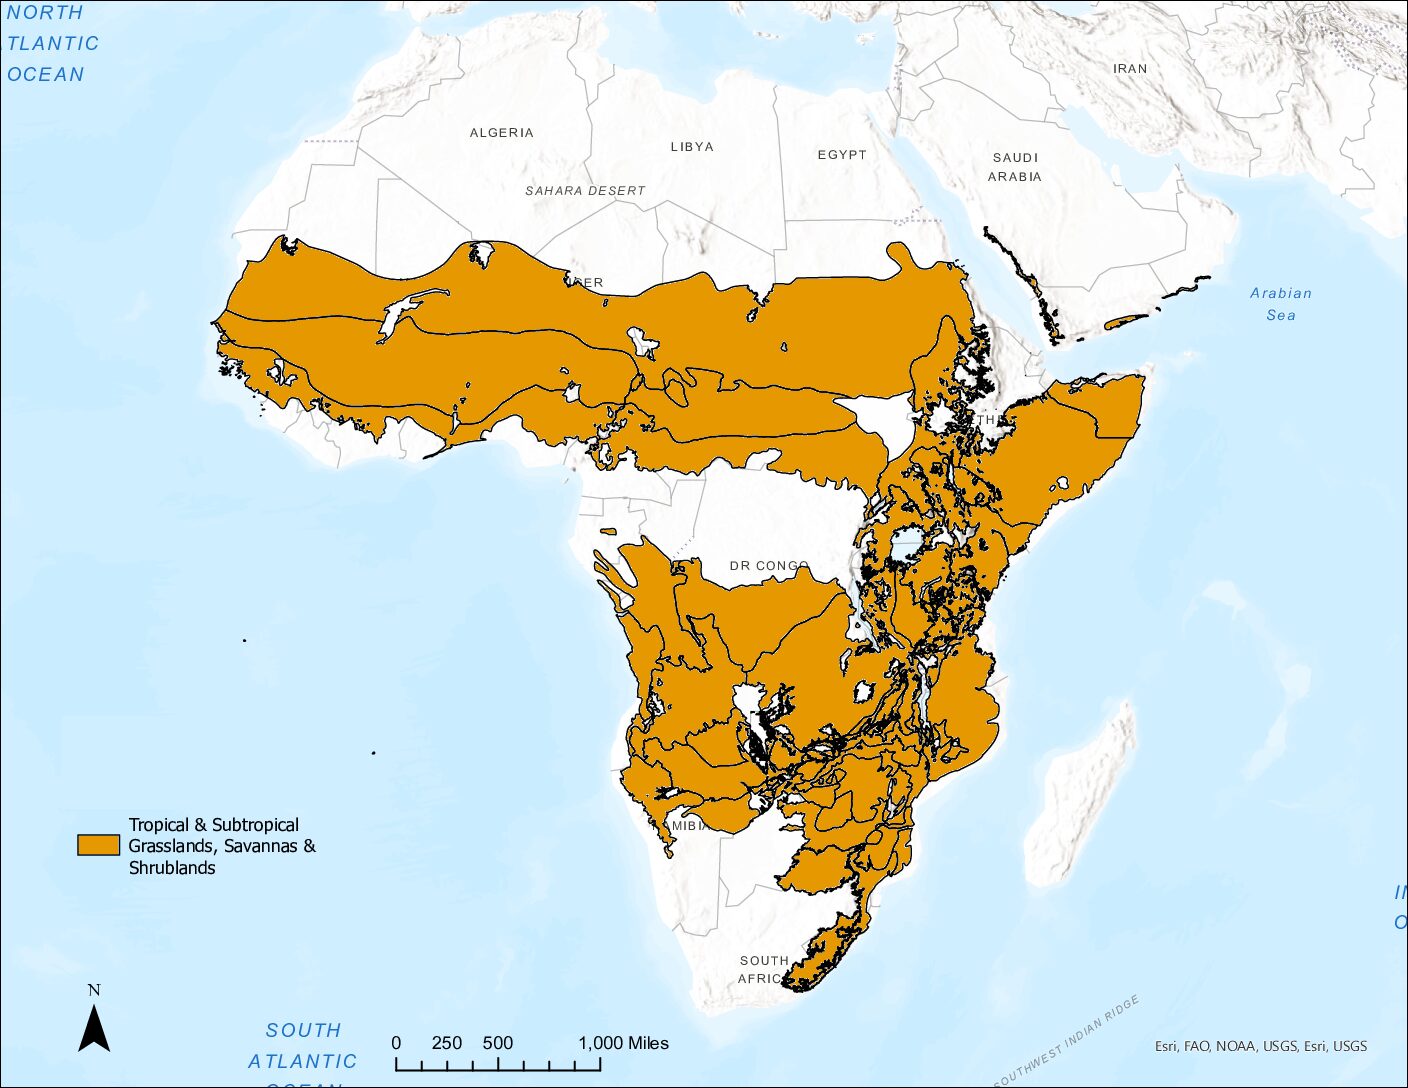 Map of Africa with areas of tropical and subtropical grasslands, savannas, and shrublands shaded orange. Much of the continent south of the Sahara Desert is shaded orange, except for a portion around the Democratic Republic of the Congo and the southern tip of the continent.